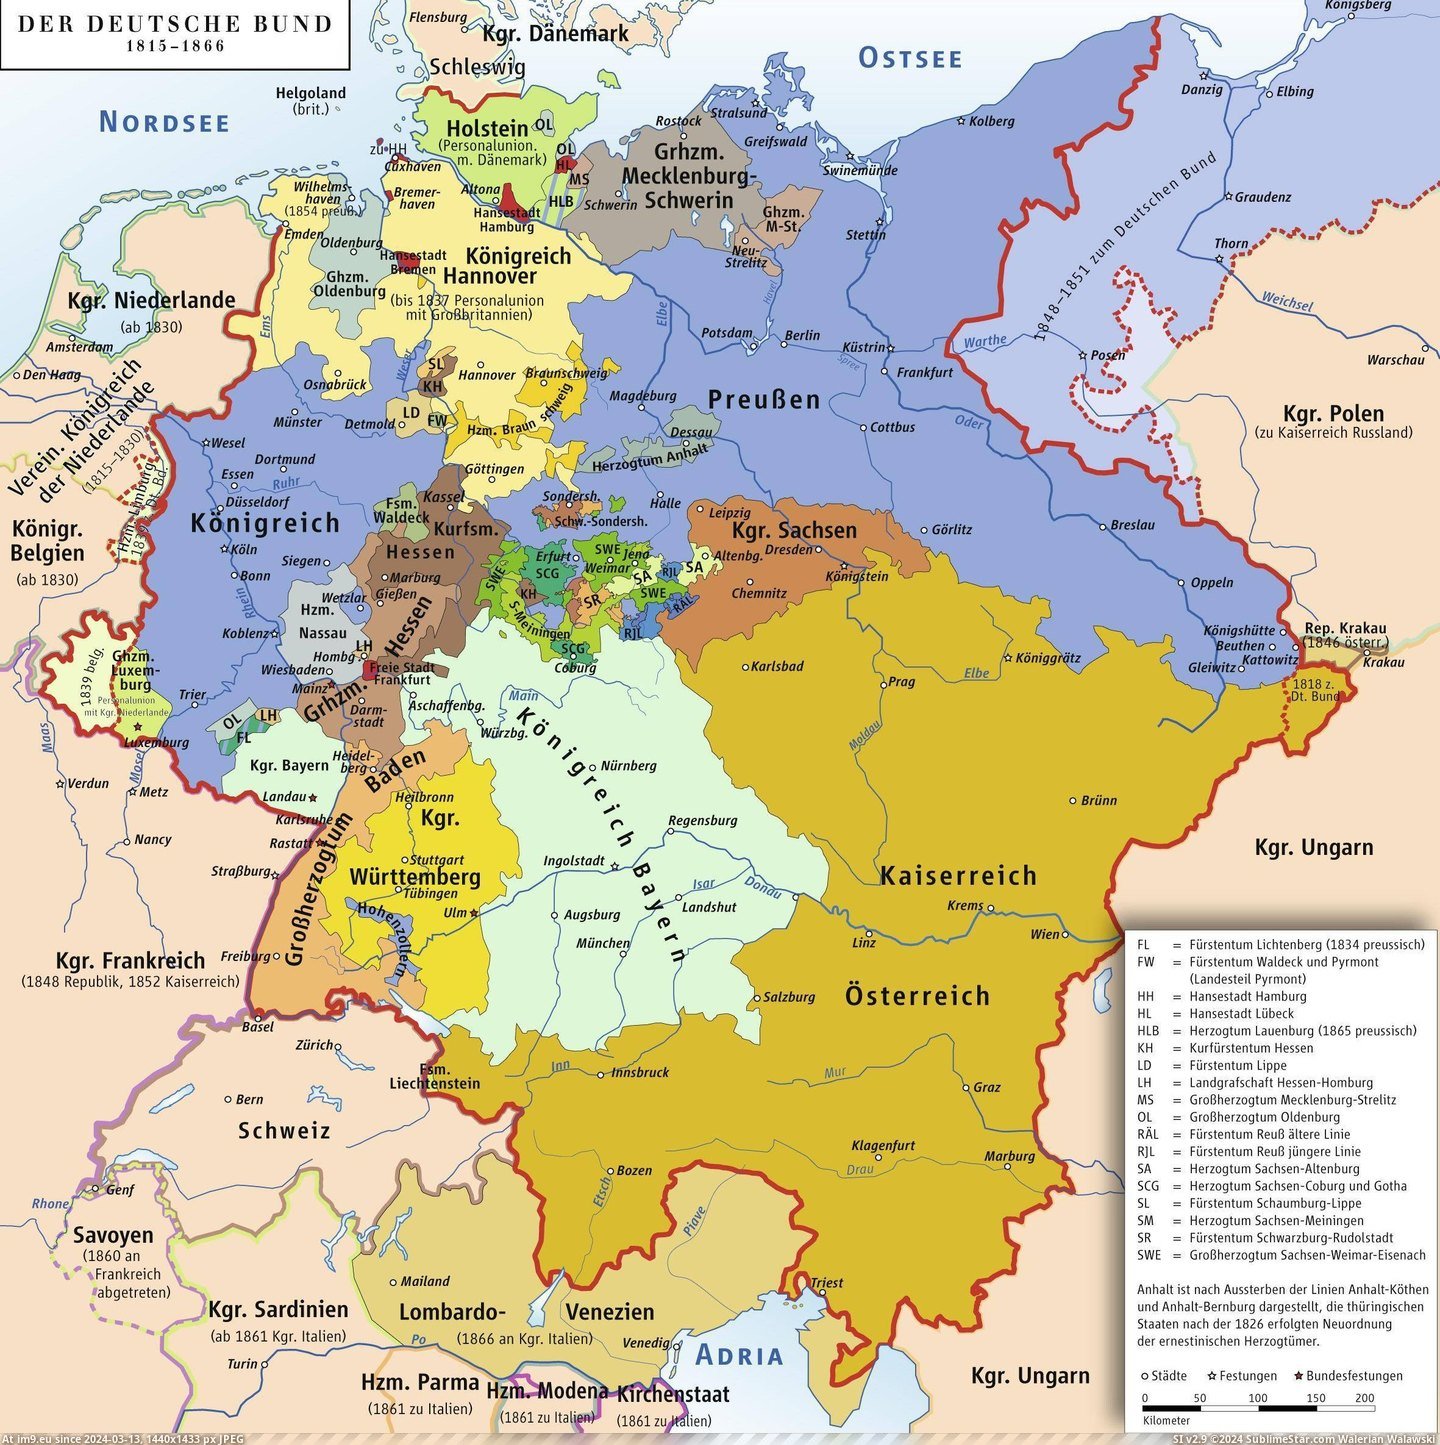  #German  [Mapporn] The German Confederation from 1815 to 1866 [2362x2362] Pic. (Изображение из альбом My r/MAPS favs))